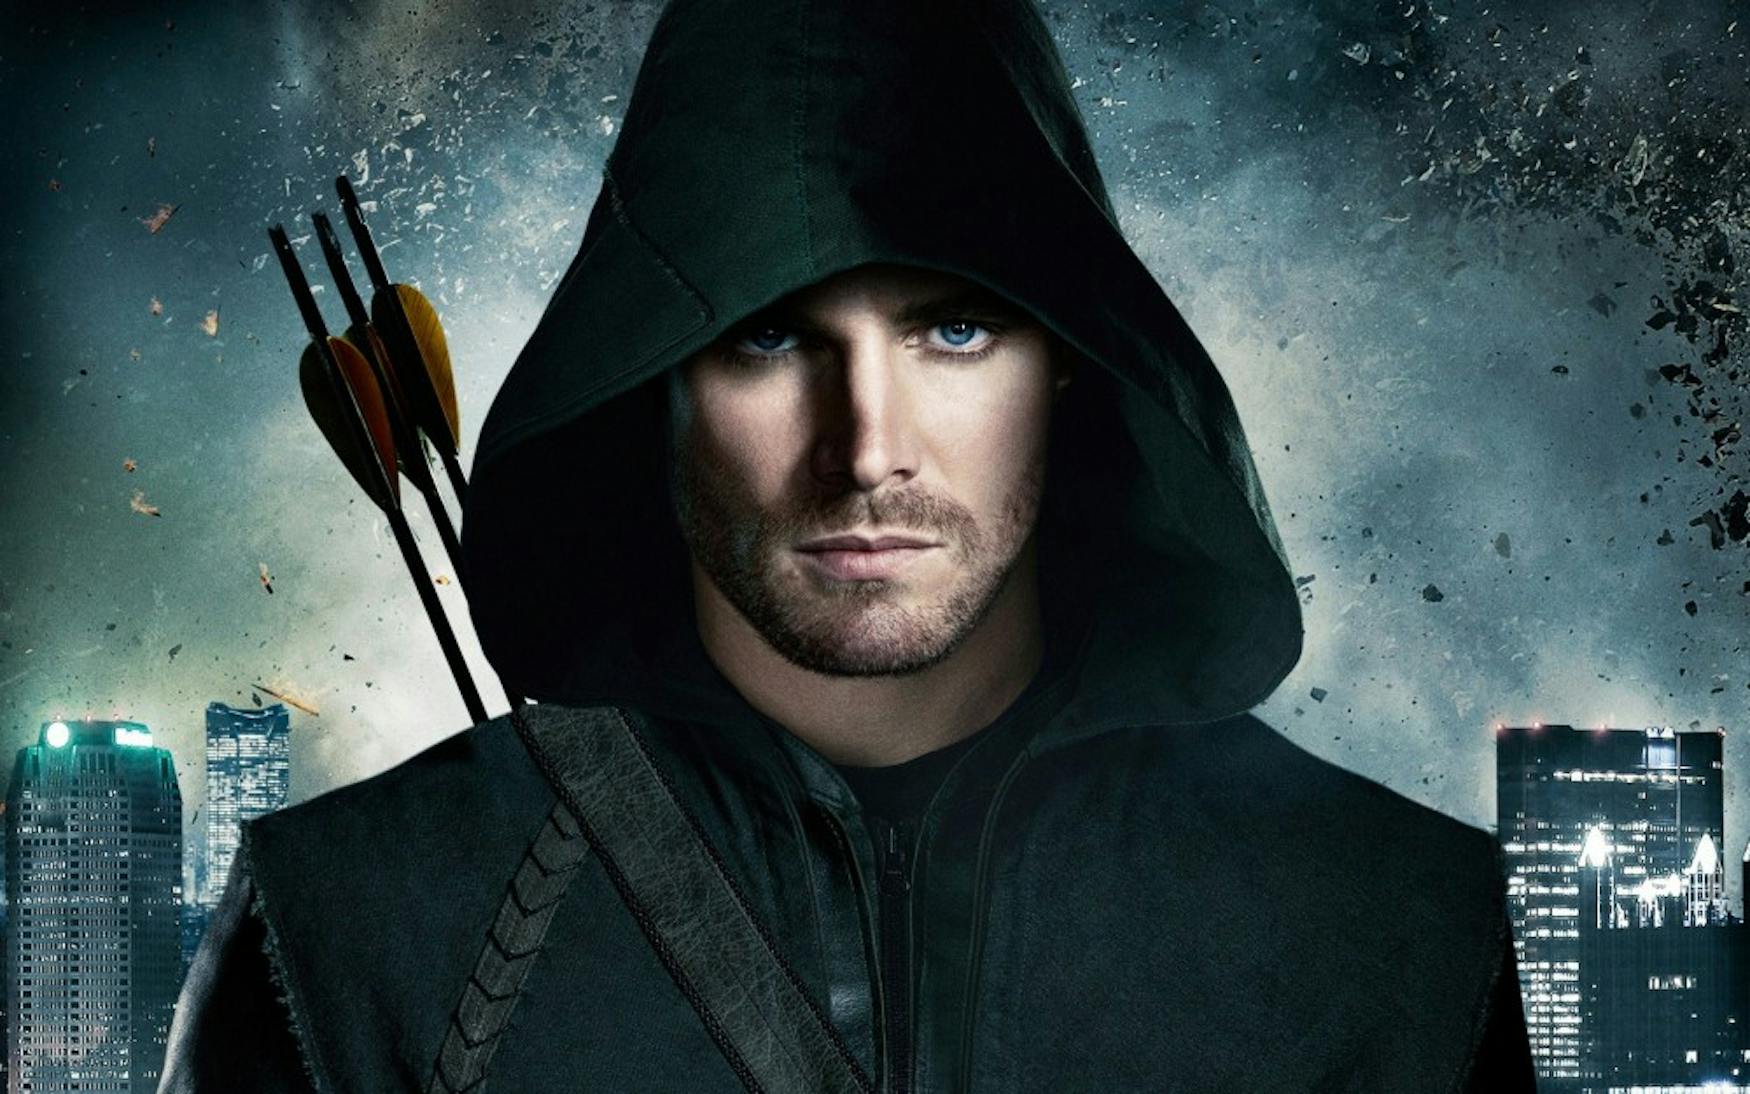 STRAIGHT AND ARROW: Stephen Amell plays Arrow on the CW show of the same name.